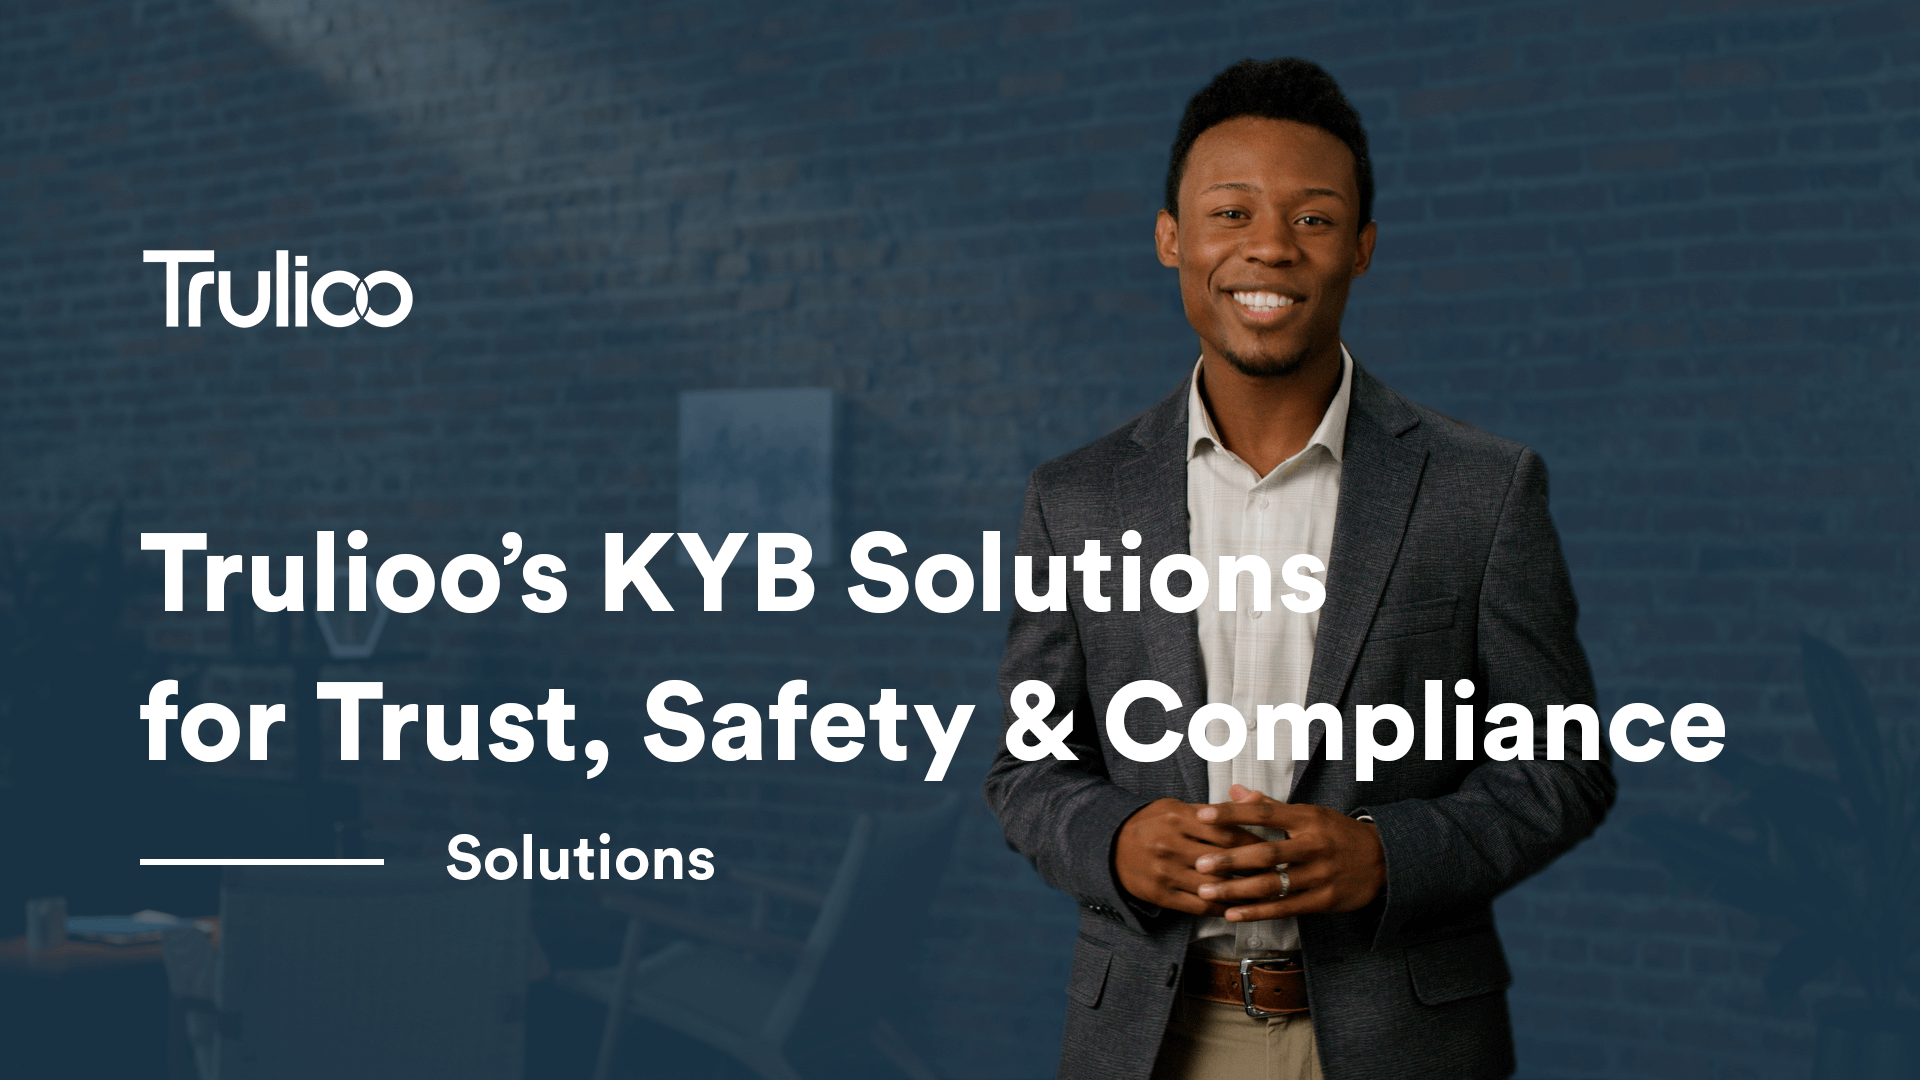 Trulioo’s KYB Solutions for Trust, Safety & Compliance